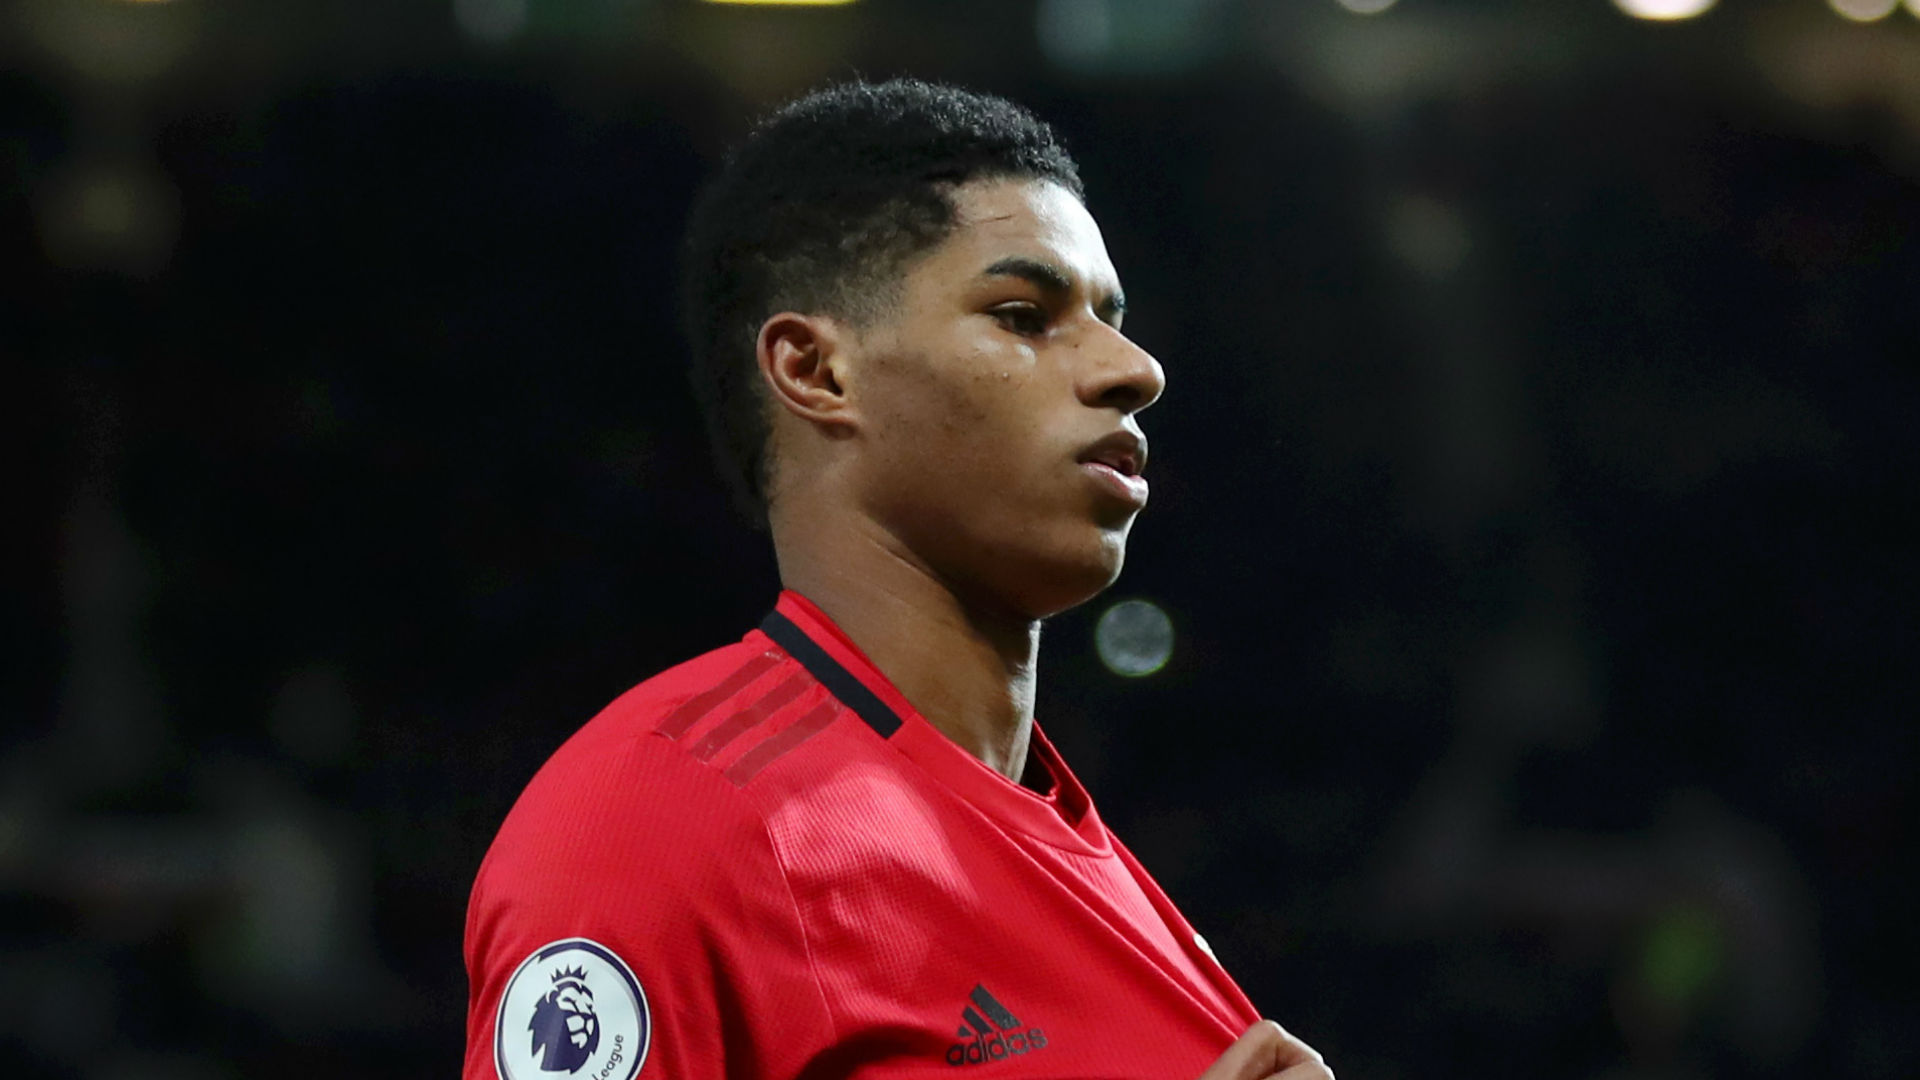 After Jadon Sancho paid tribute on Sunday, Manchester United star Marcus Rashford has shown his support for the Black Lives Matter campaign.